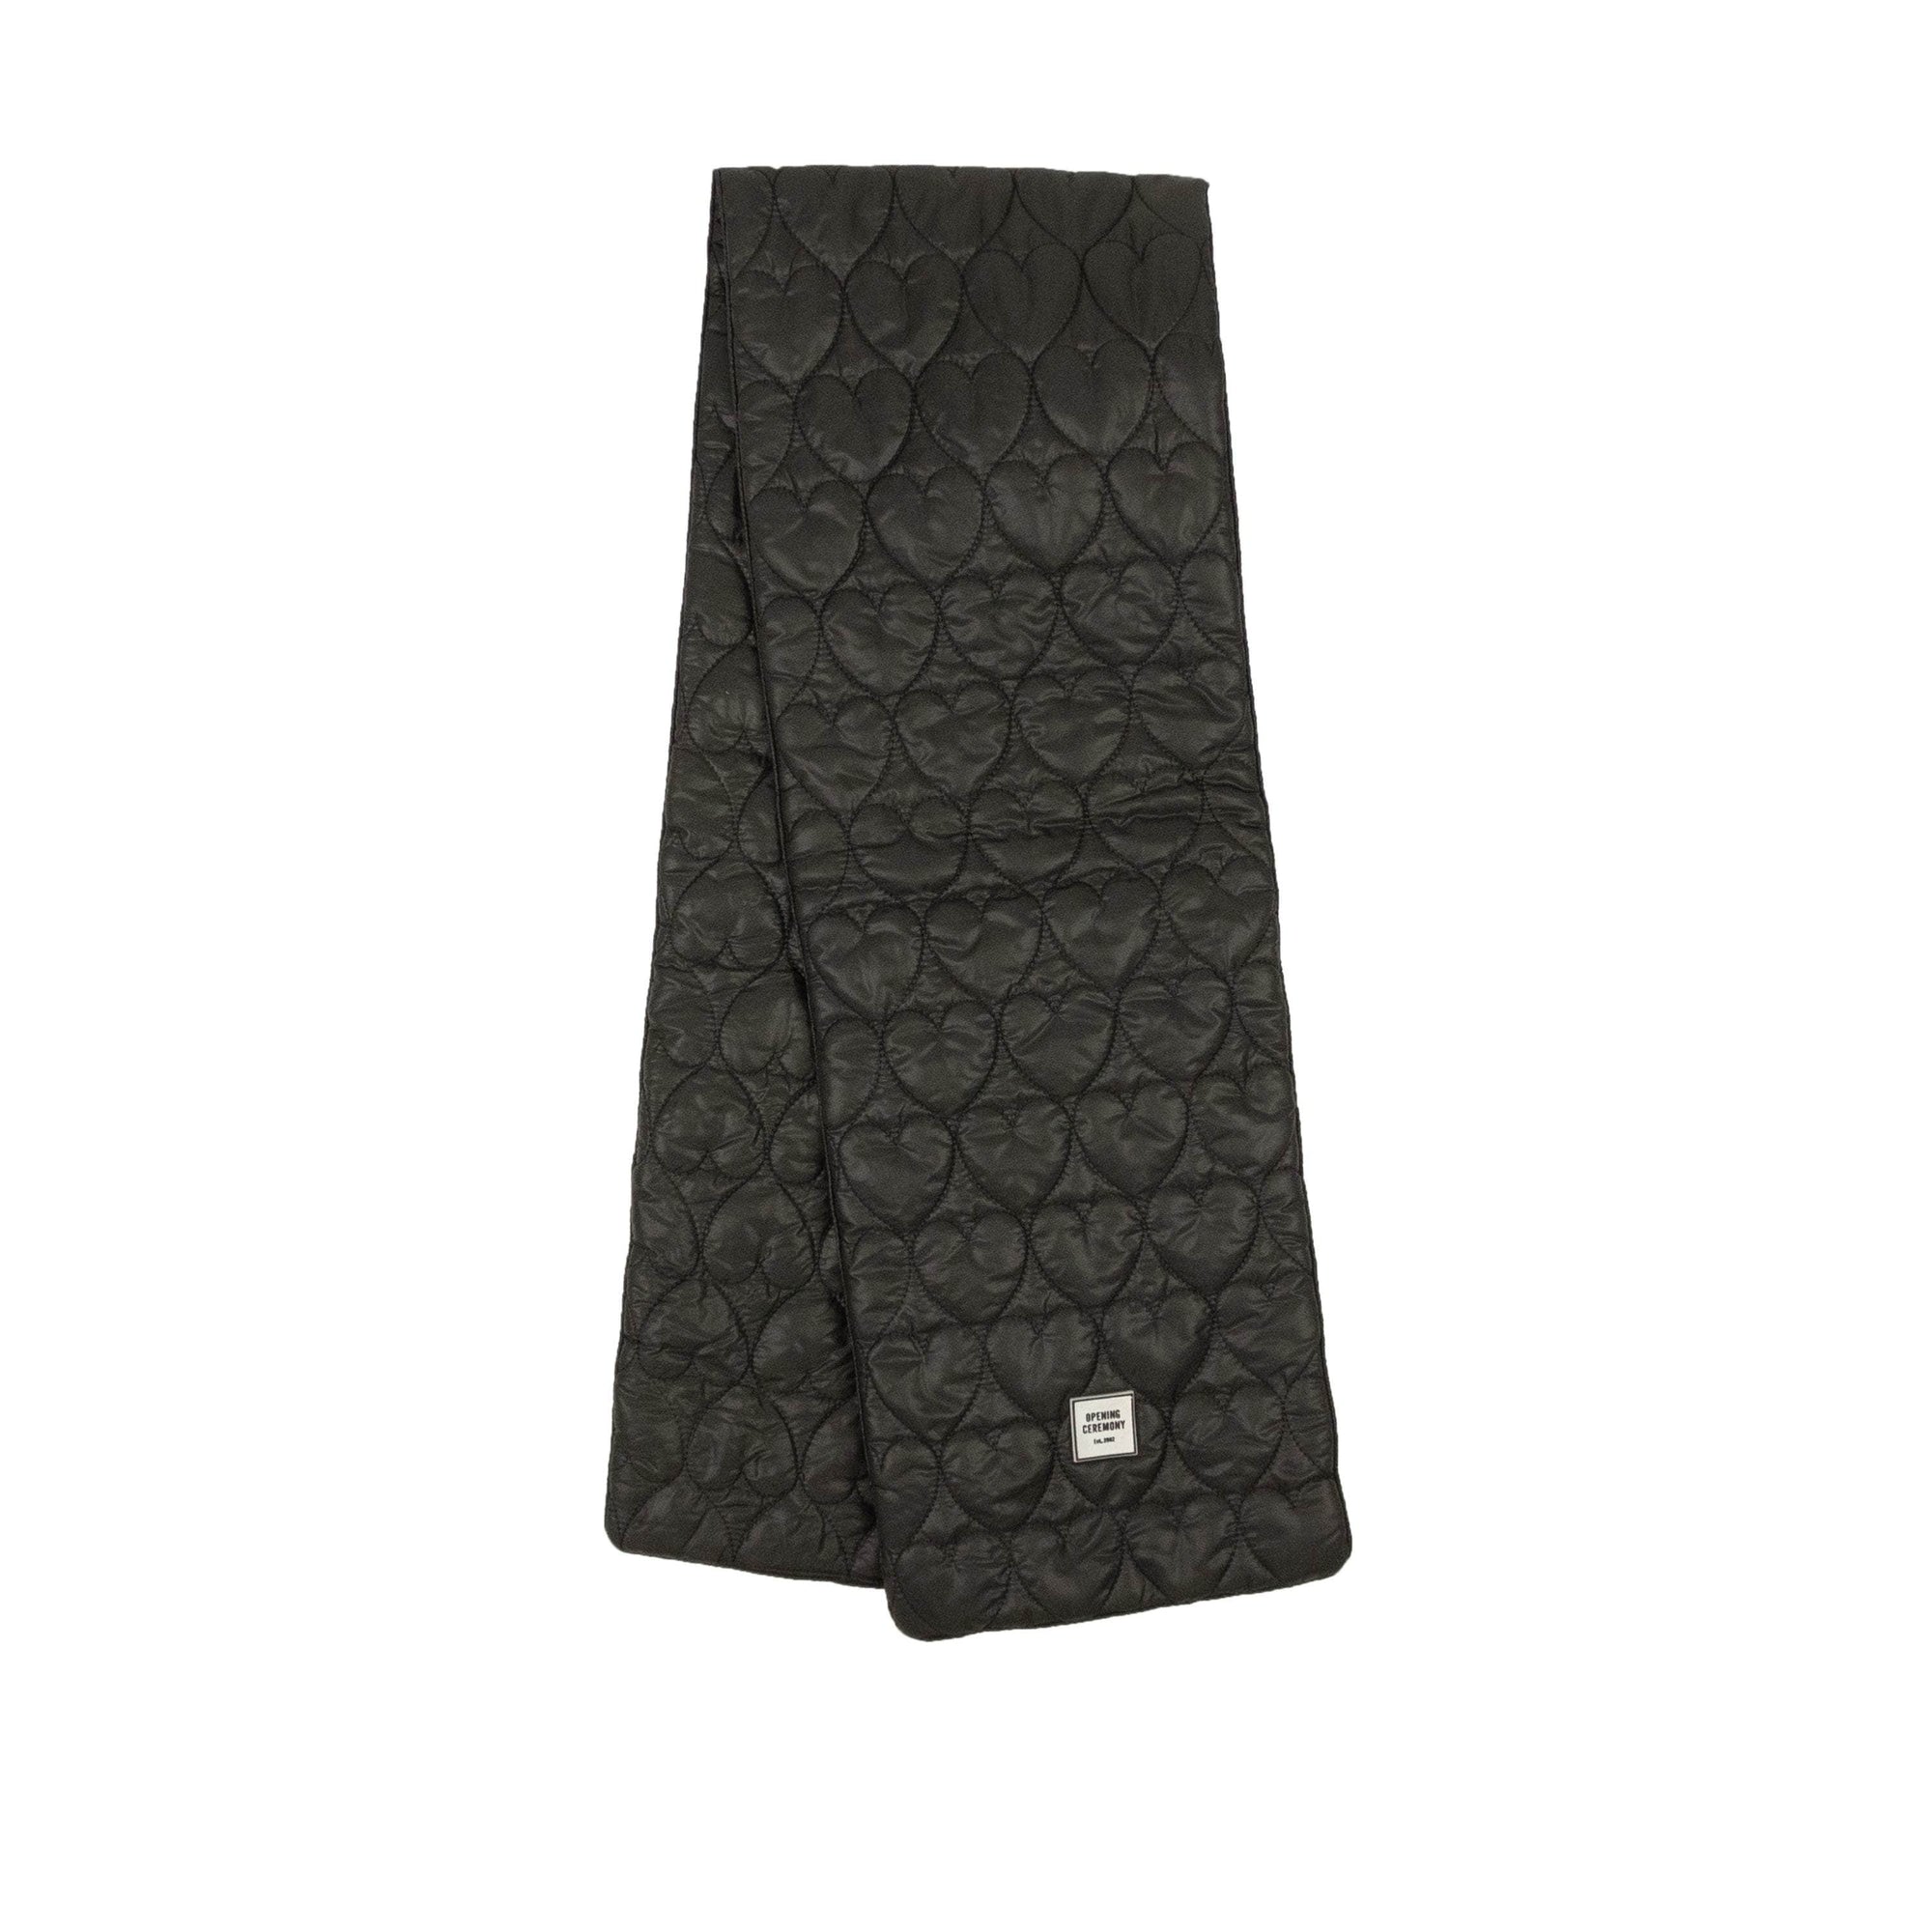 Opening Ceremony channelenable-all, chicmi, couponcollection, gender-mens, gender-womens, main-accessories OS Black Heart Quilted Scarf 95-OCY-3112/OS 95-OCY-3112/OS